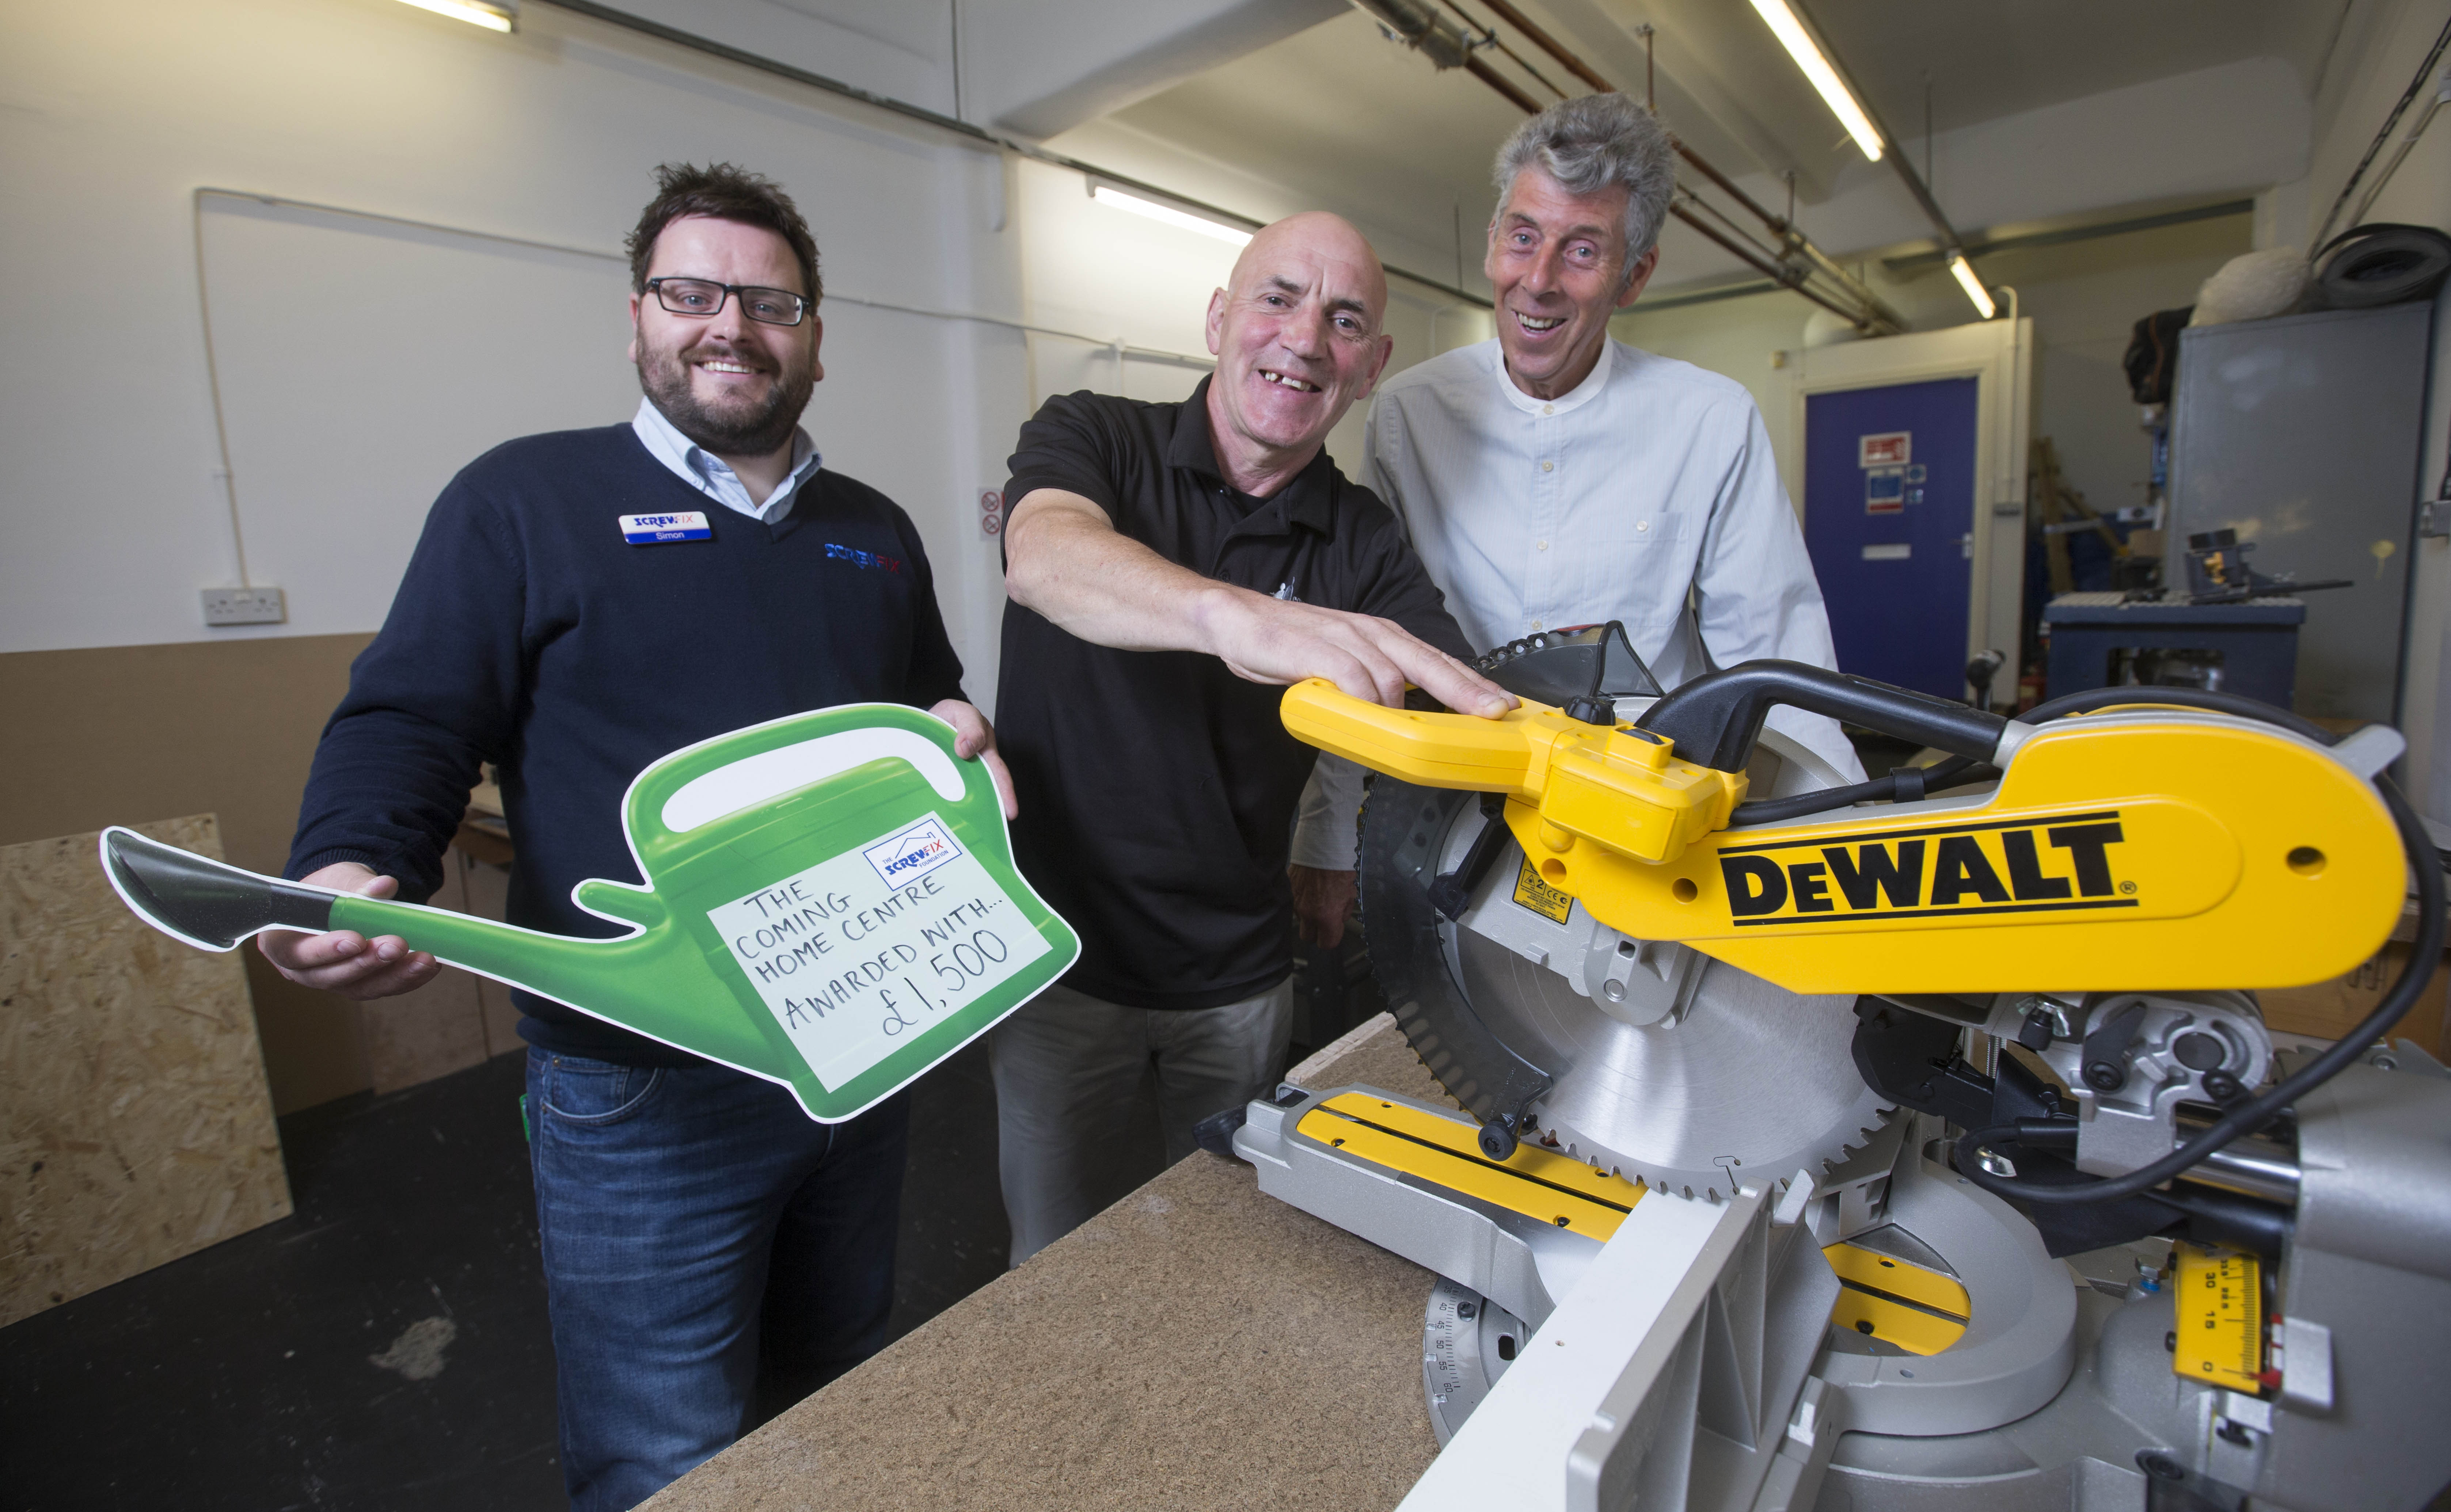 Glasgow based charity gets a helping hand from The Screwfix Foundation